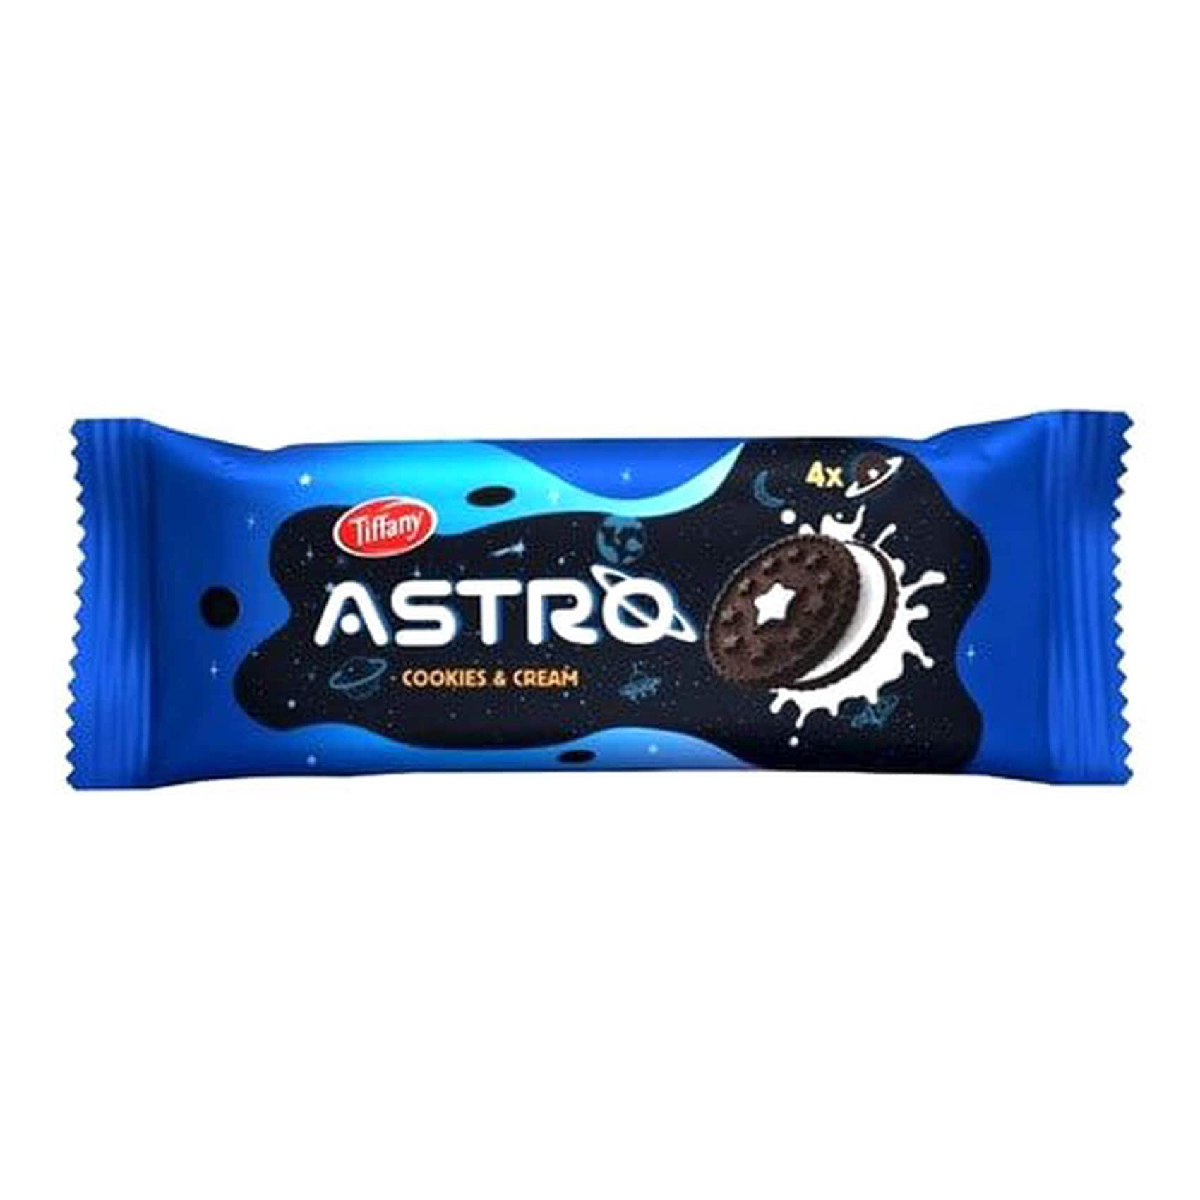 Tiffany Astro Cookies & Cream Sandwich Biscuits Value Pack 12 x 36 g